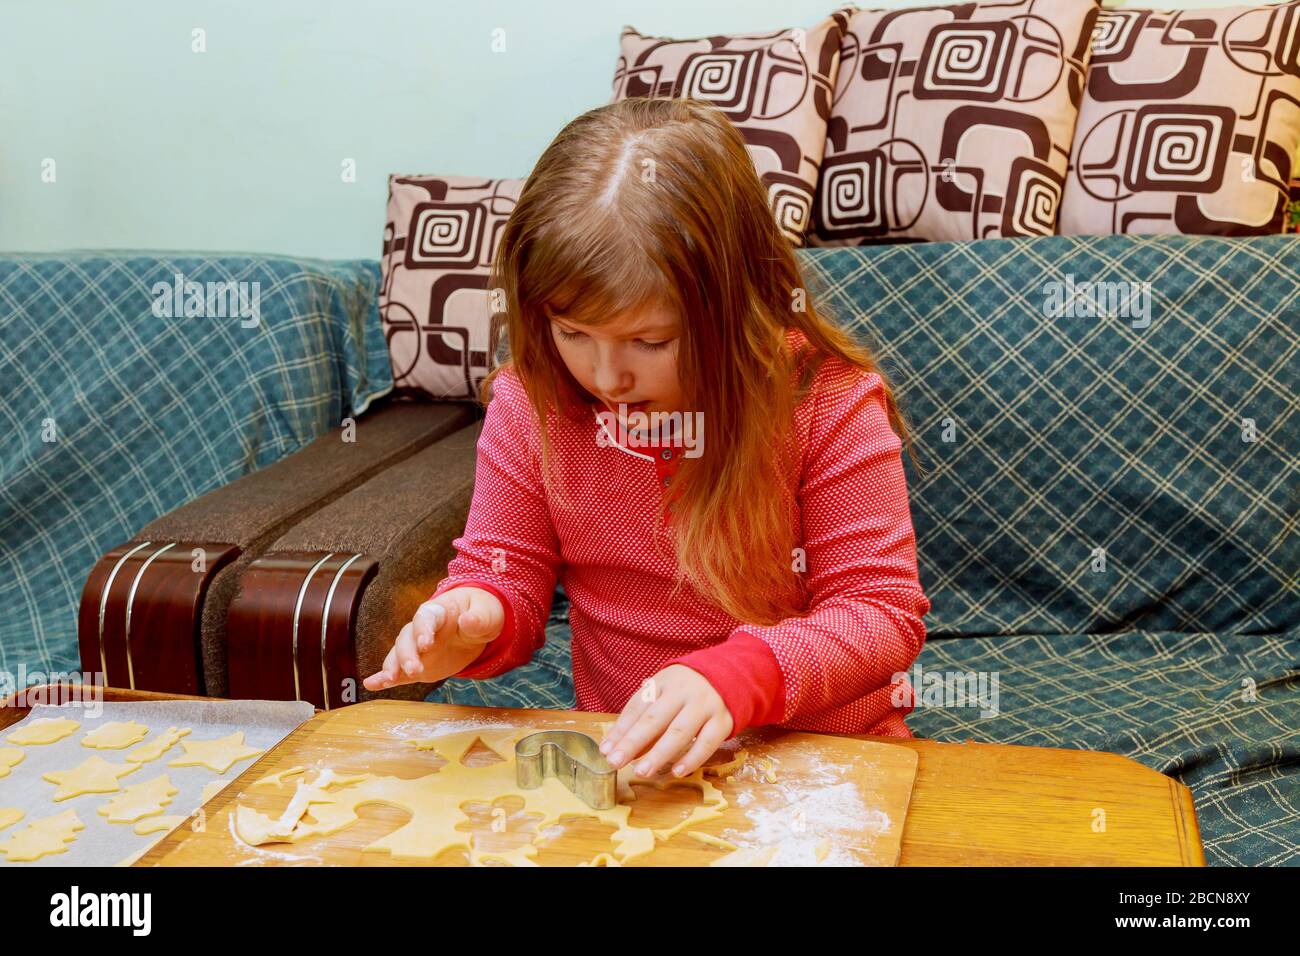 Little girl in making with preparing the dough on the table Happy little girl child cooking Stock Photo